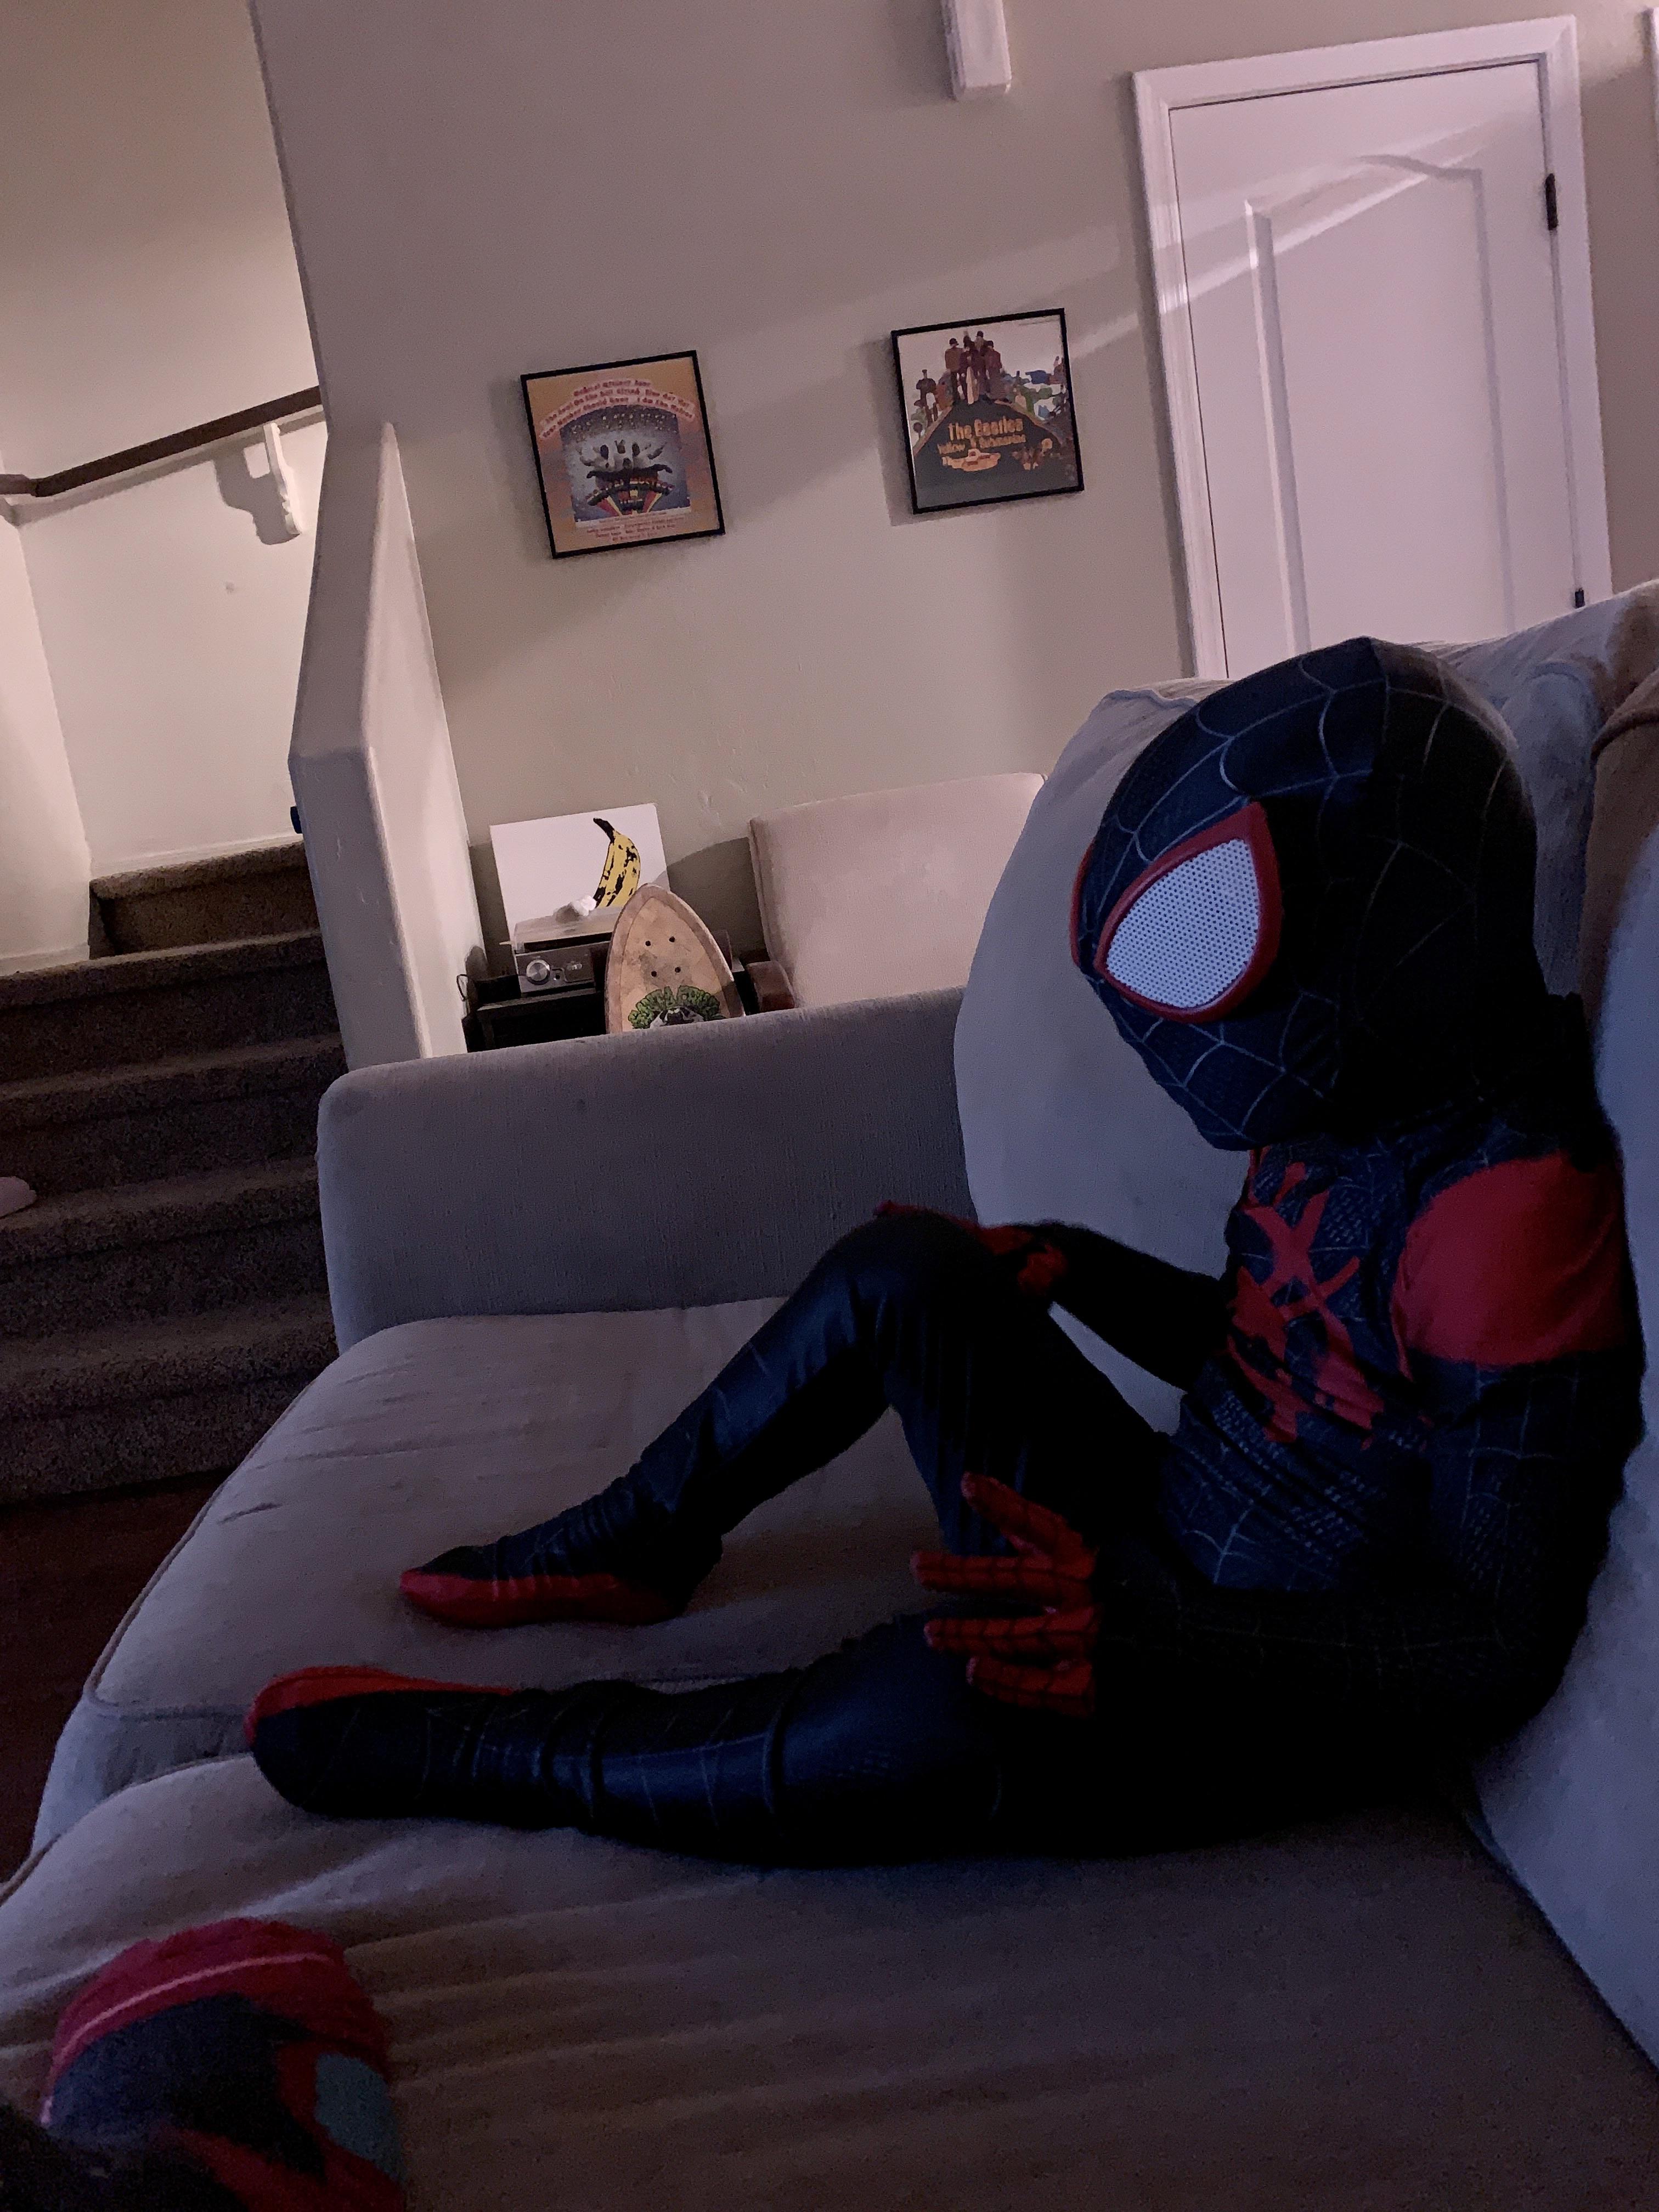 Got my son a new Spider-Man costume last night. He woke me up an hour early today to wear it and watch cartoons this morning. Love this little dude.